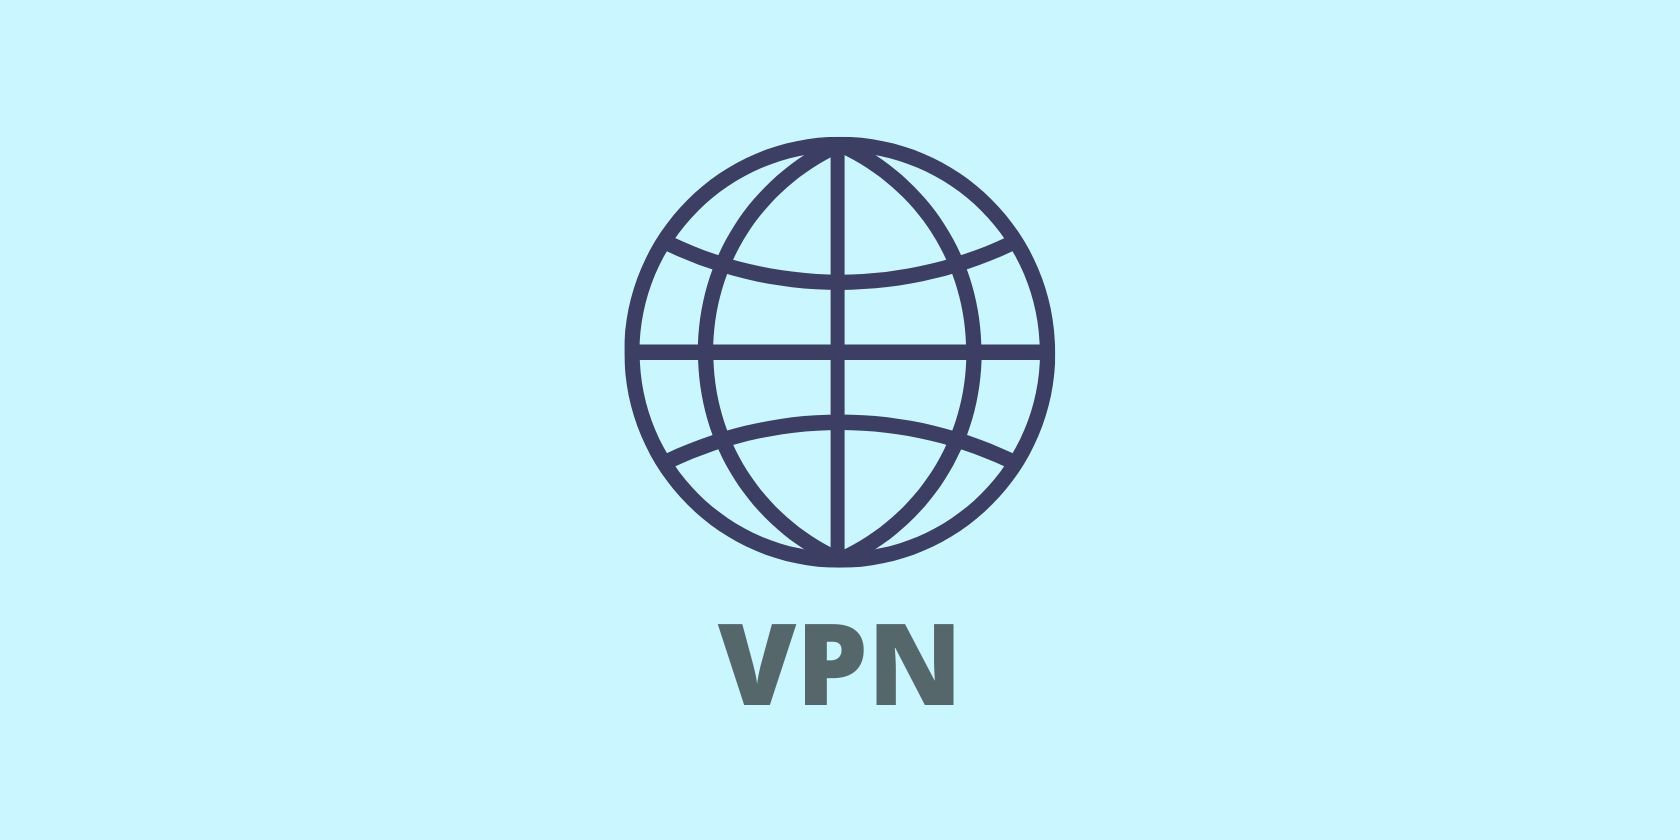 A globe with the letters VPN seen on light blue background